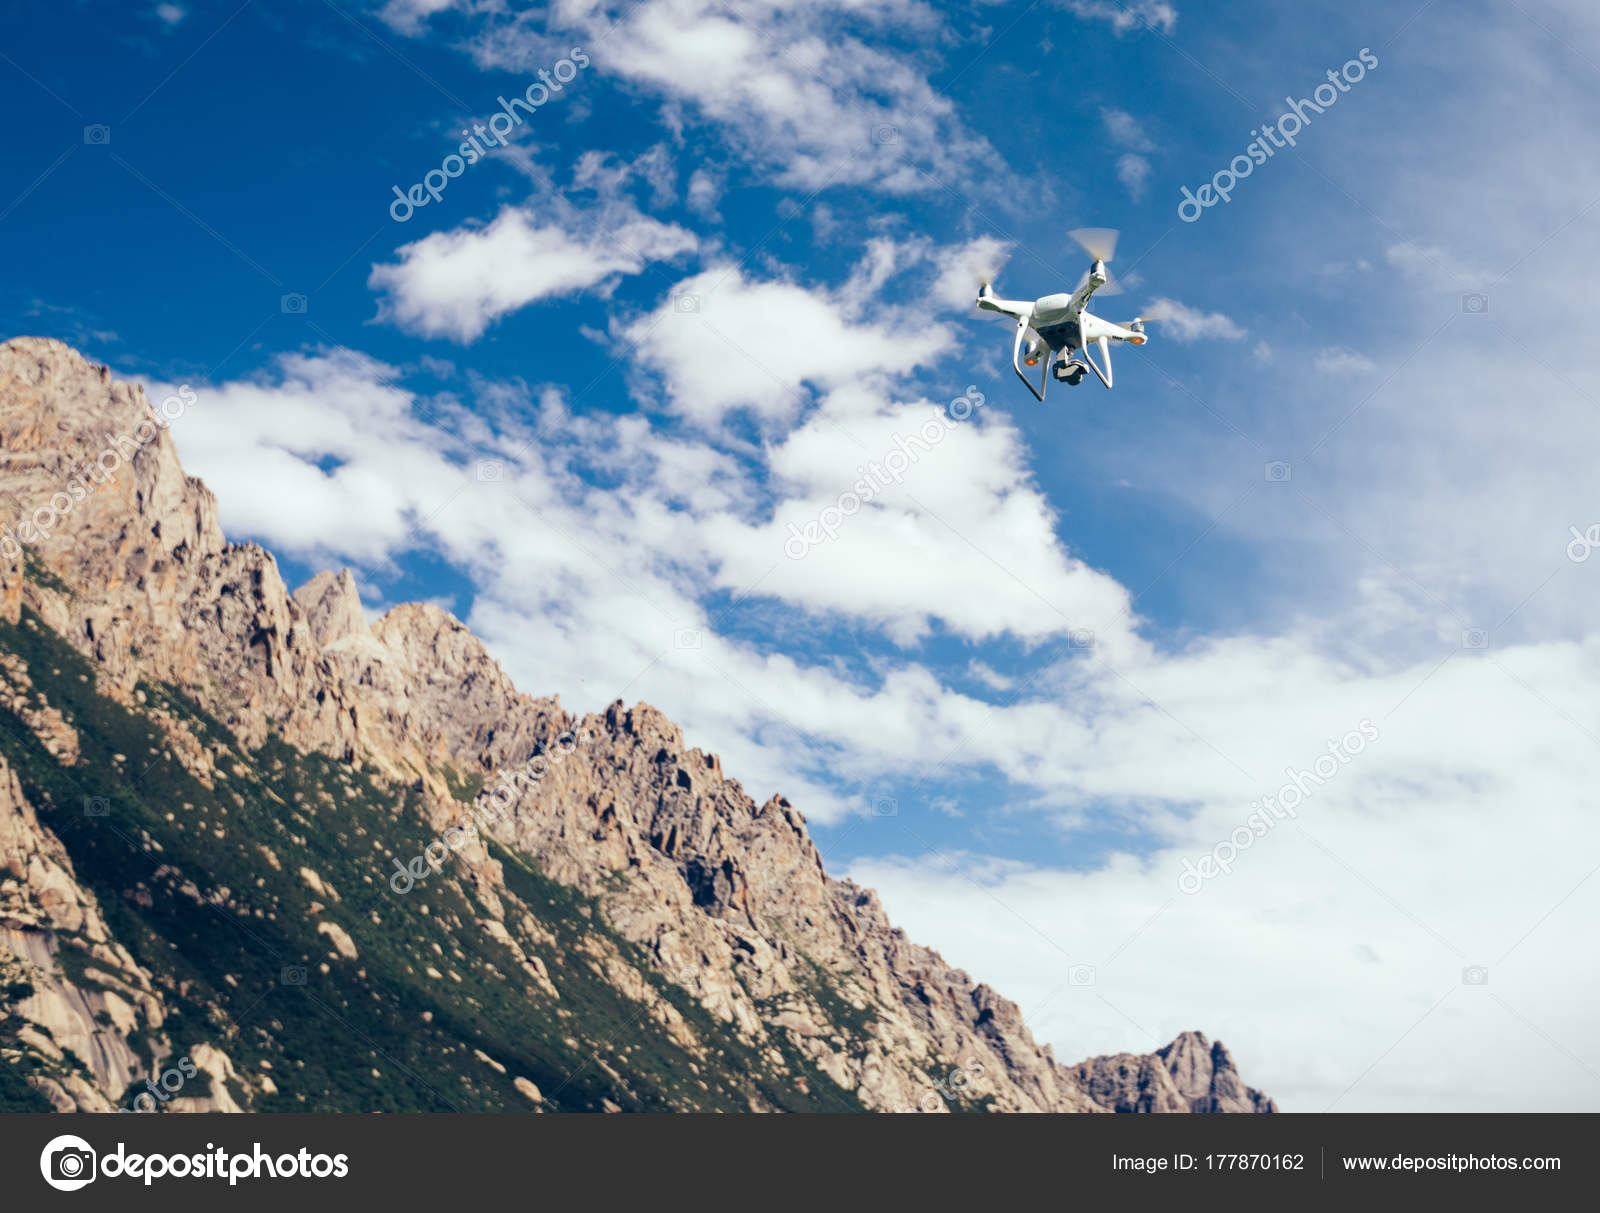 Drone Flying Air High Altitude Mountains — Stock Photo © lzf #177870162